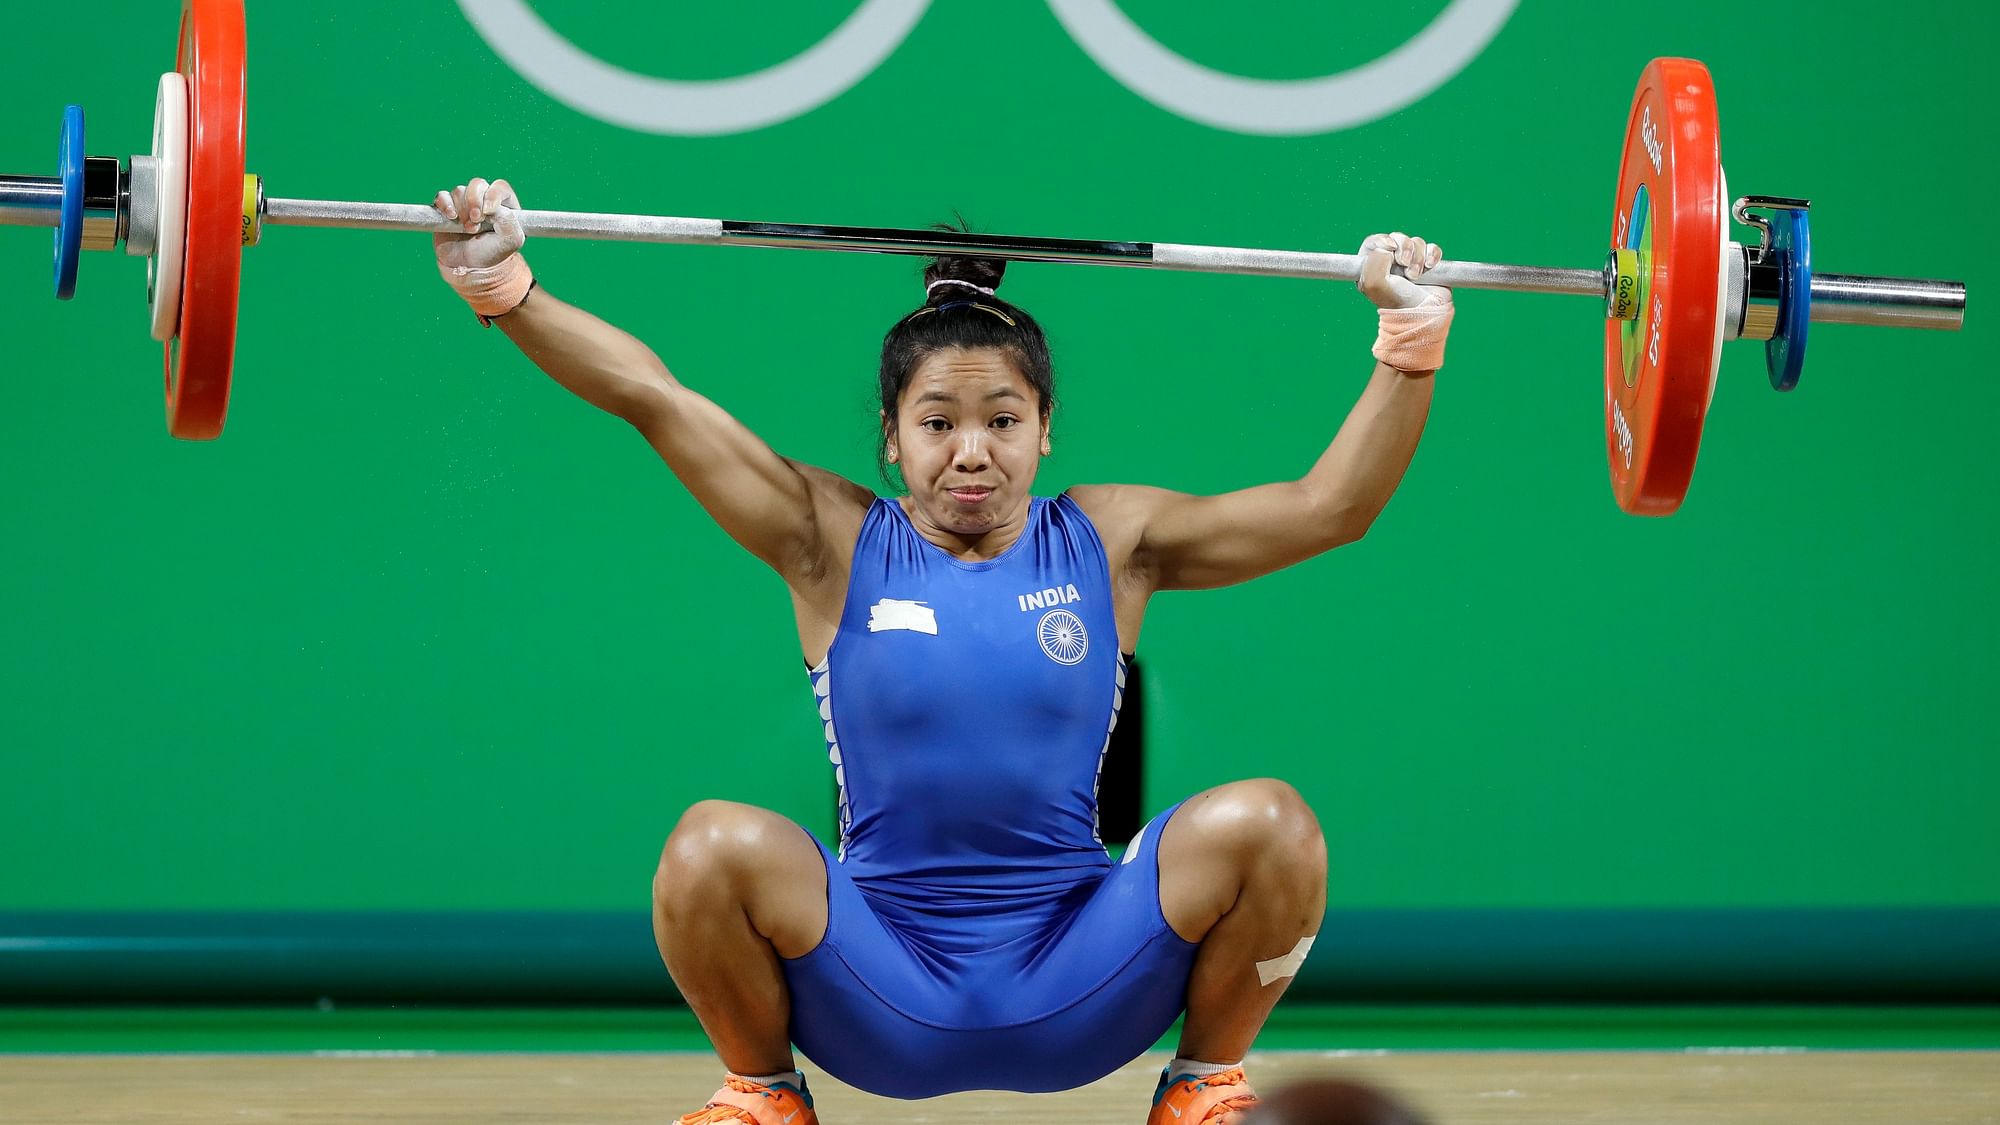 Former world champion Mirabai Chanu will be India’s top medal contender at the Asian Weightlifting Championship that starts on Saturday in China.